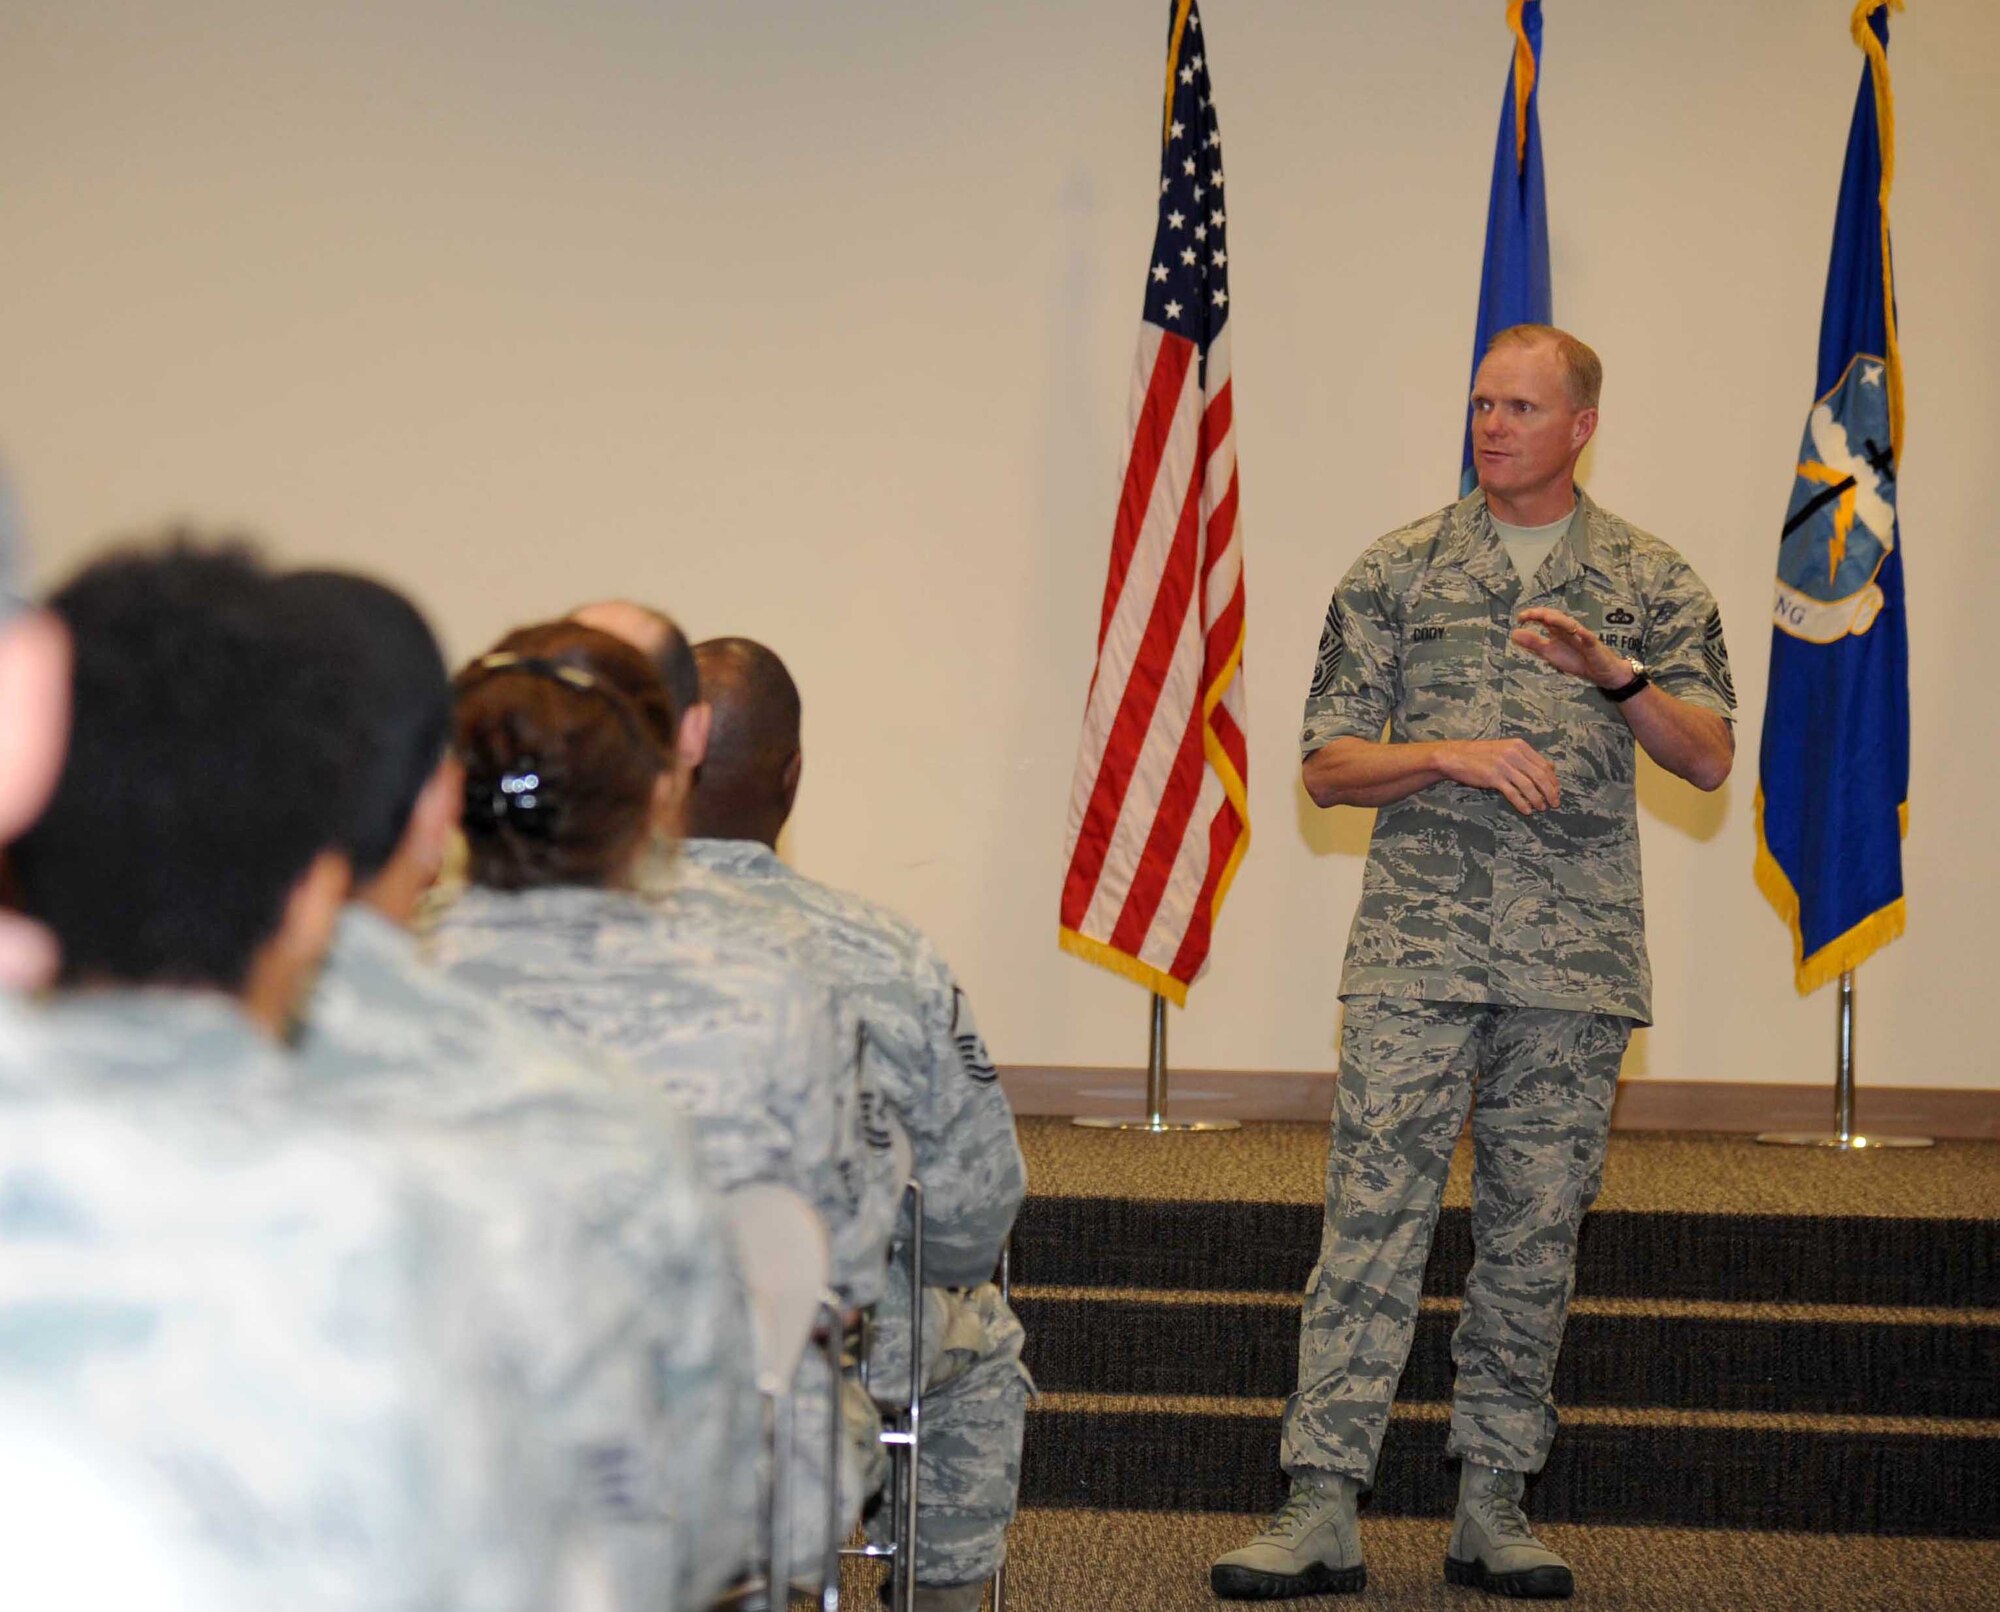 Chief Master Sgt. of the Air Force James A. Cody addresses members of the 53rd Weather Reconnaissance Squadron after receiving a 403rd Wing mission brief at the Roberts Consolidated Aircraft Maintenance Facility during a two-day visit of Keesler Air Force Base, Miss., Sept. 22-23, 2014.  The purpose of the visit was to thank Team Keesler members and further understand the various missions here, including 2nd Air Force, 81st Training Wing and the 403rd Wing. (U.S. Air Force photo by Kemberly Groue)